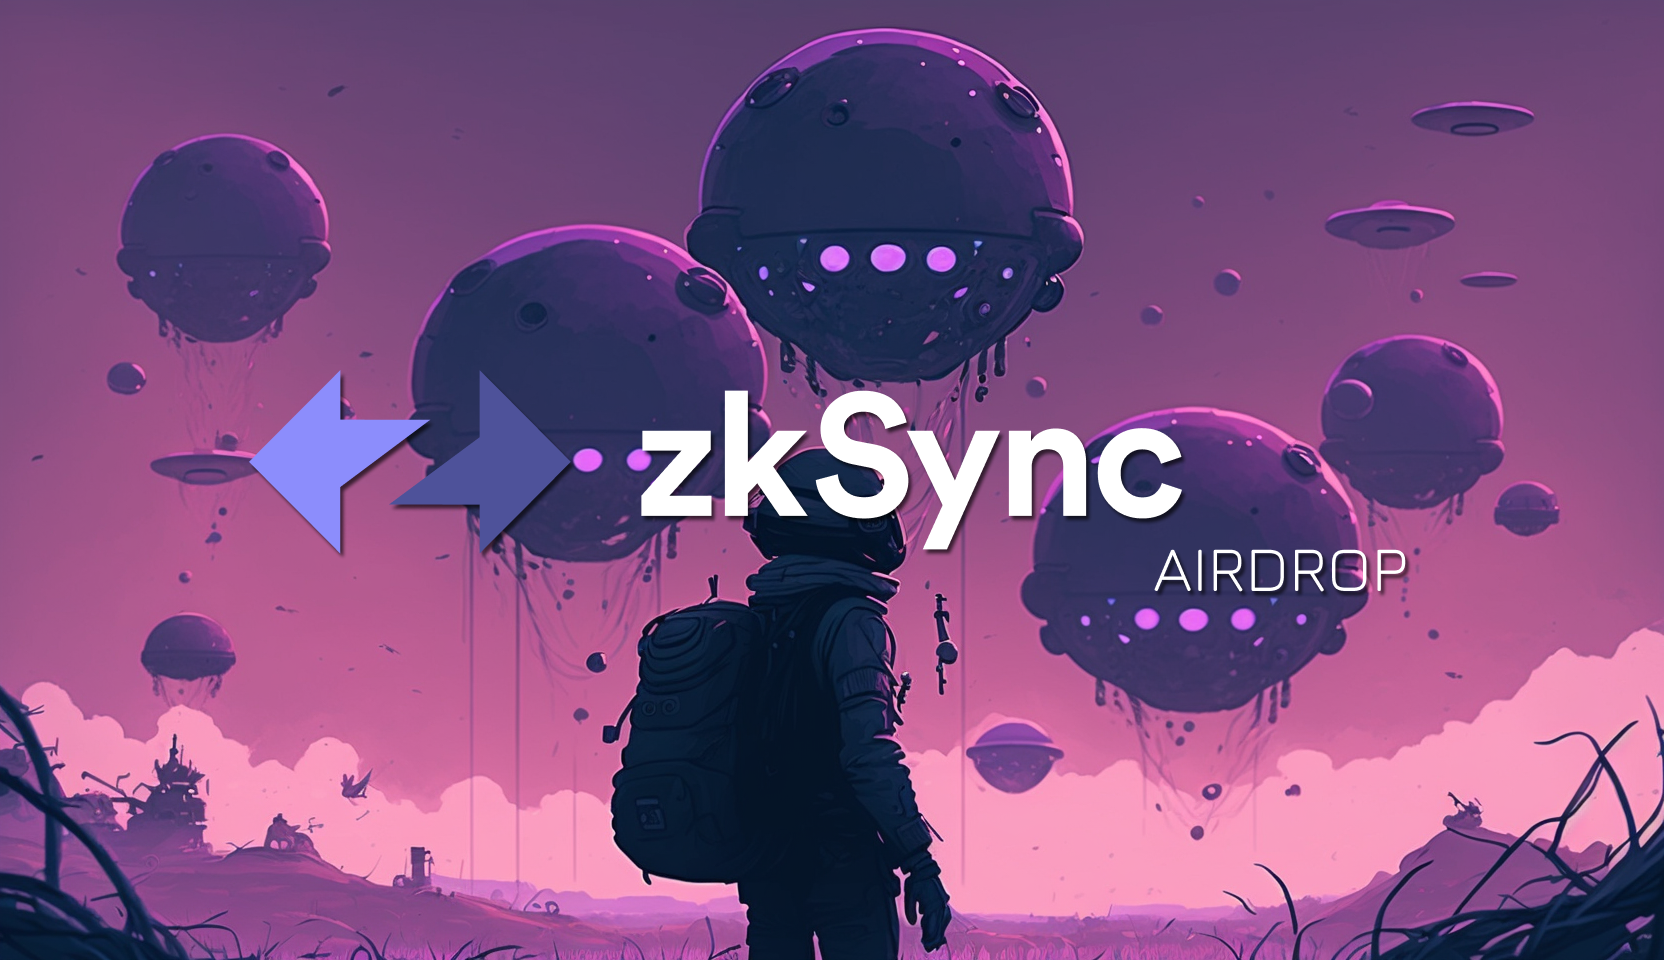 How to farm potential zkSync airdrops